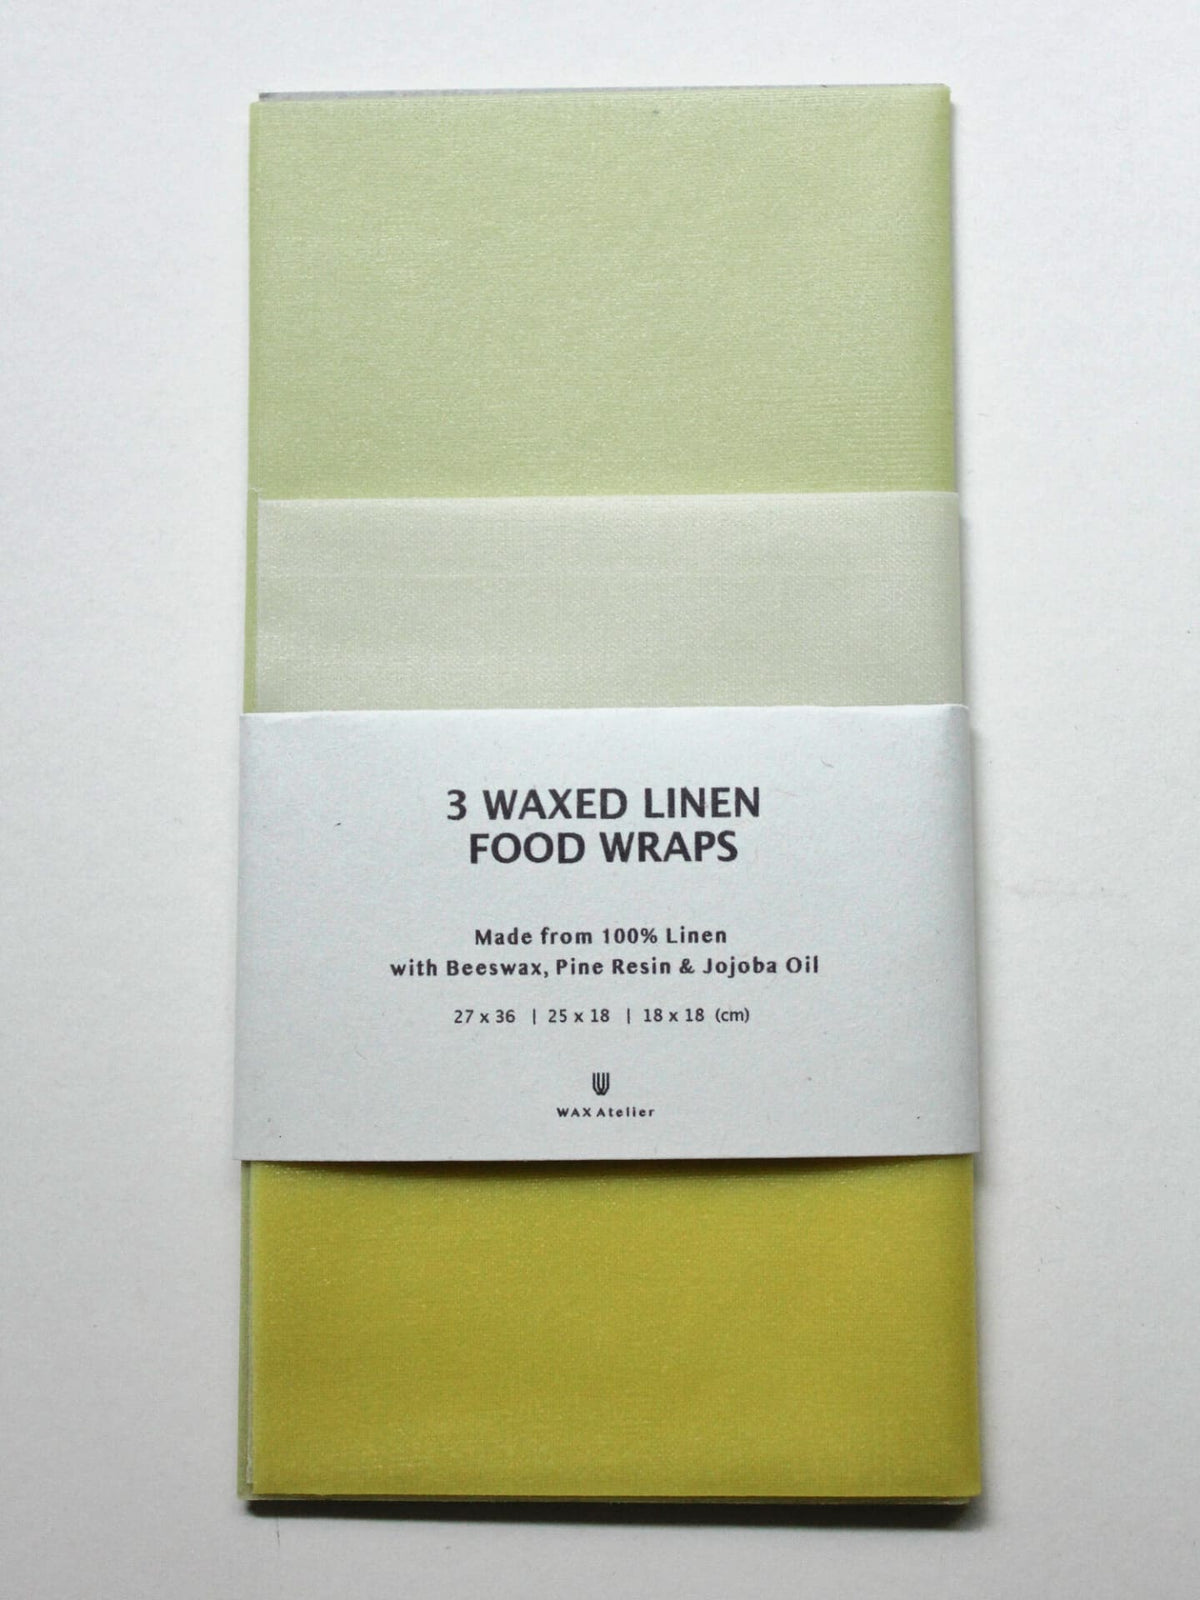 A sustainable alternative to plastic clingfilm, this set includes three Ivy ⋄ Madder ⋄ Indigo waxed linen food wraps made with beeswax, pine resin, and jojoba oil by Wax Atelier.